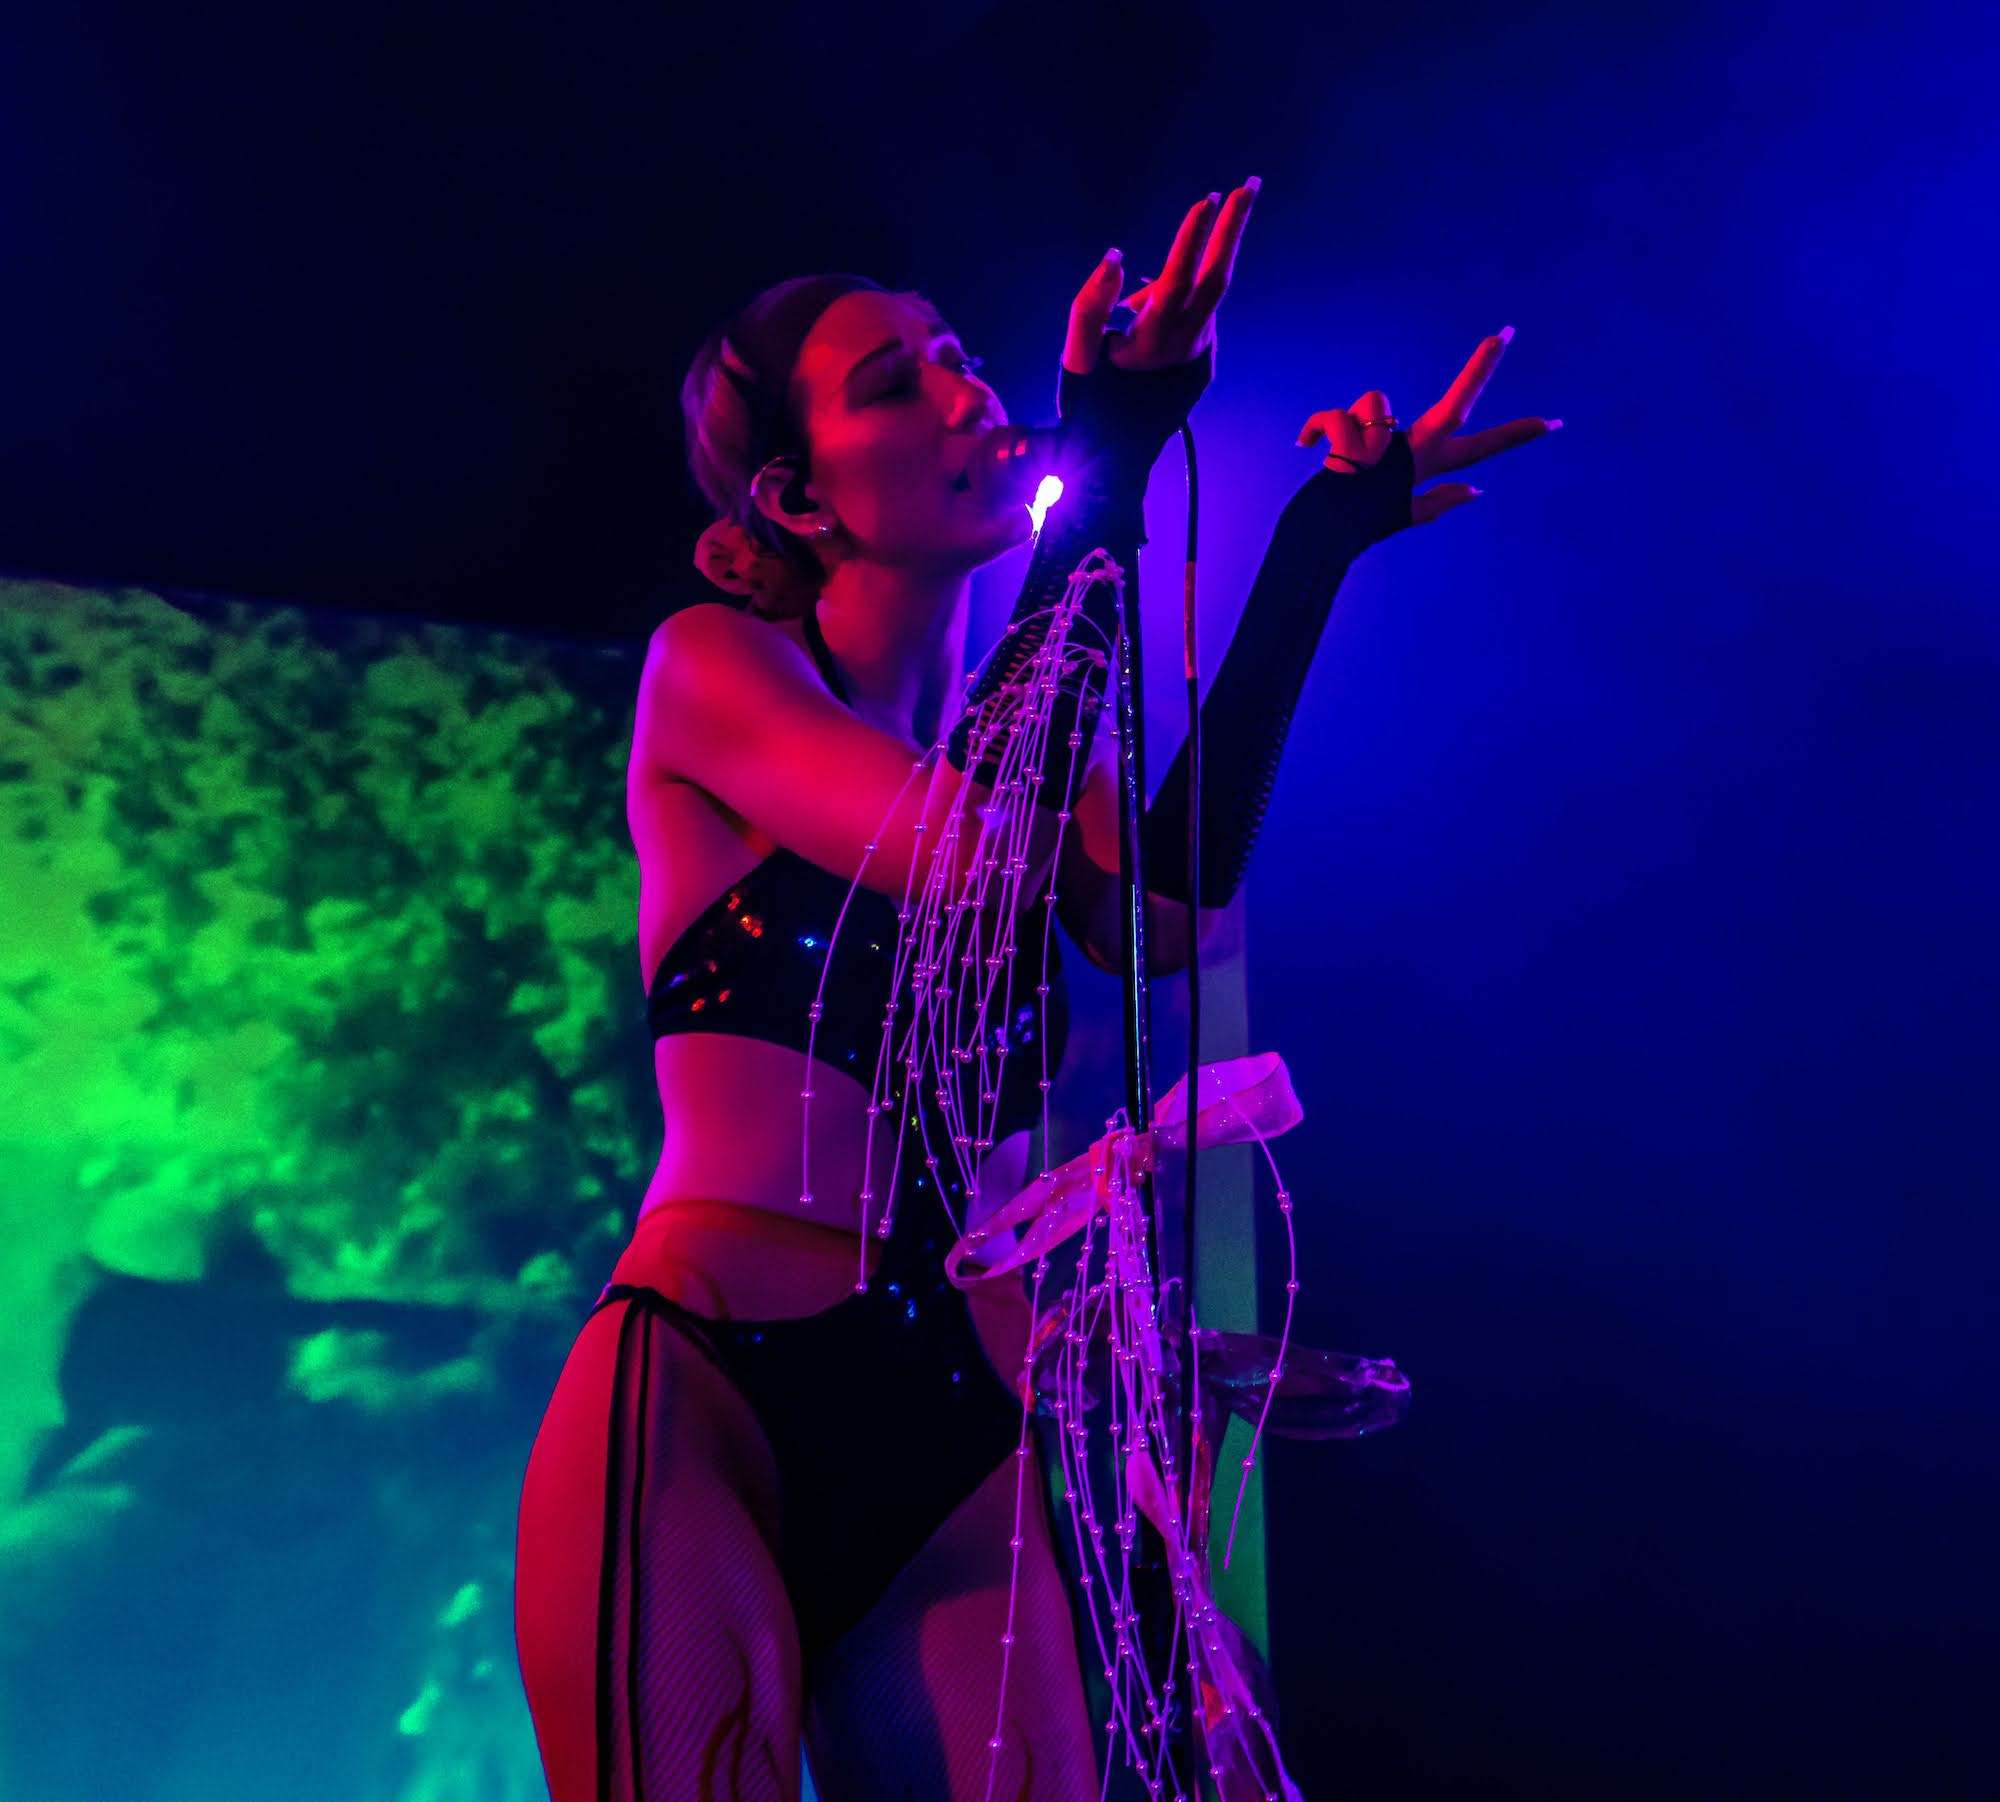 Tei Shi Live at Sleeping Village [GALLERY] 14